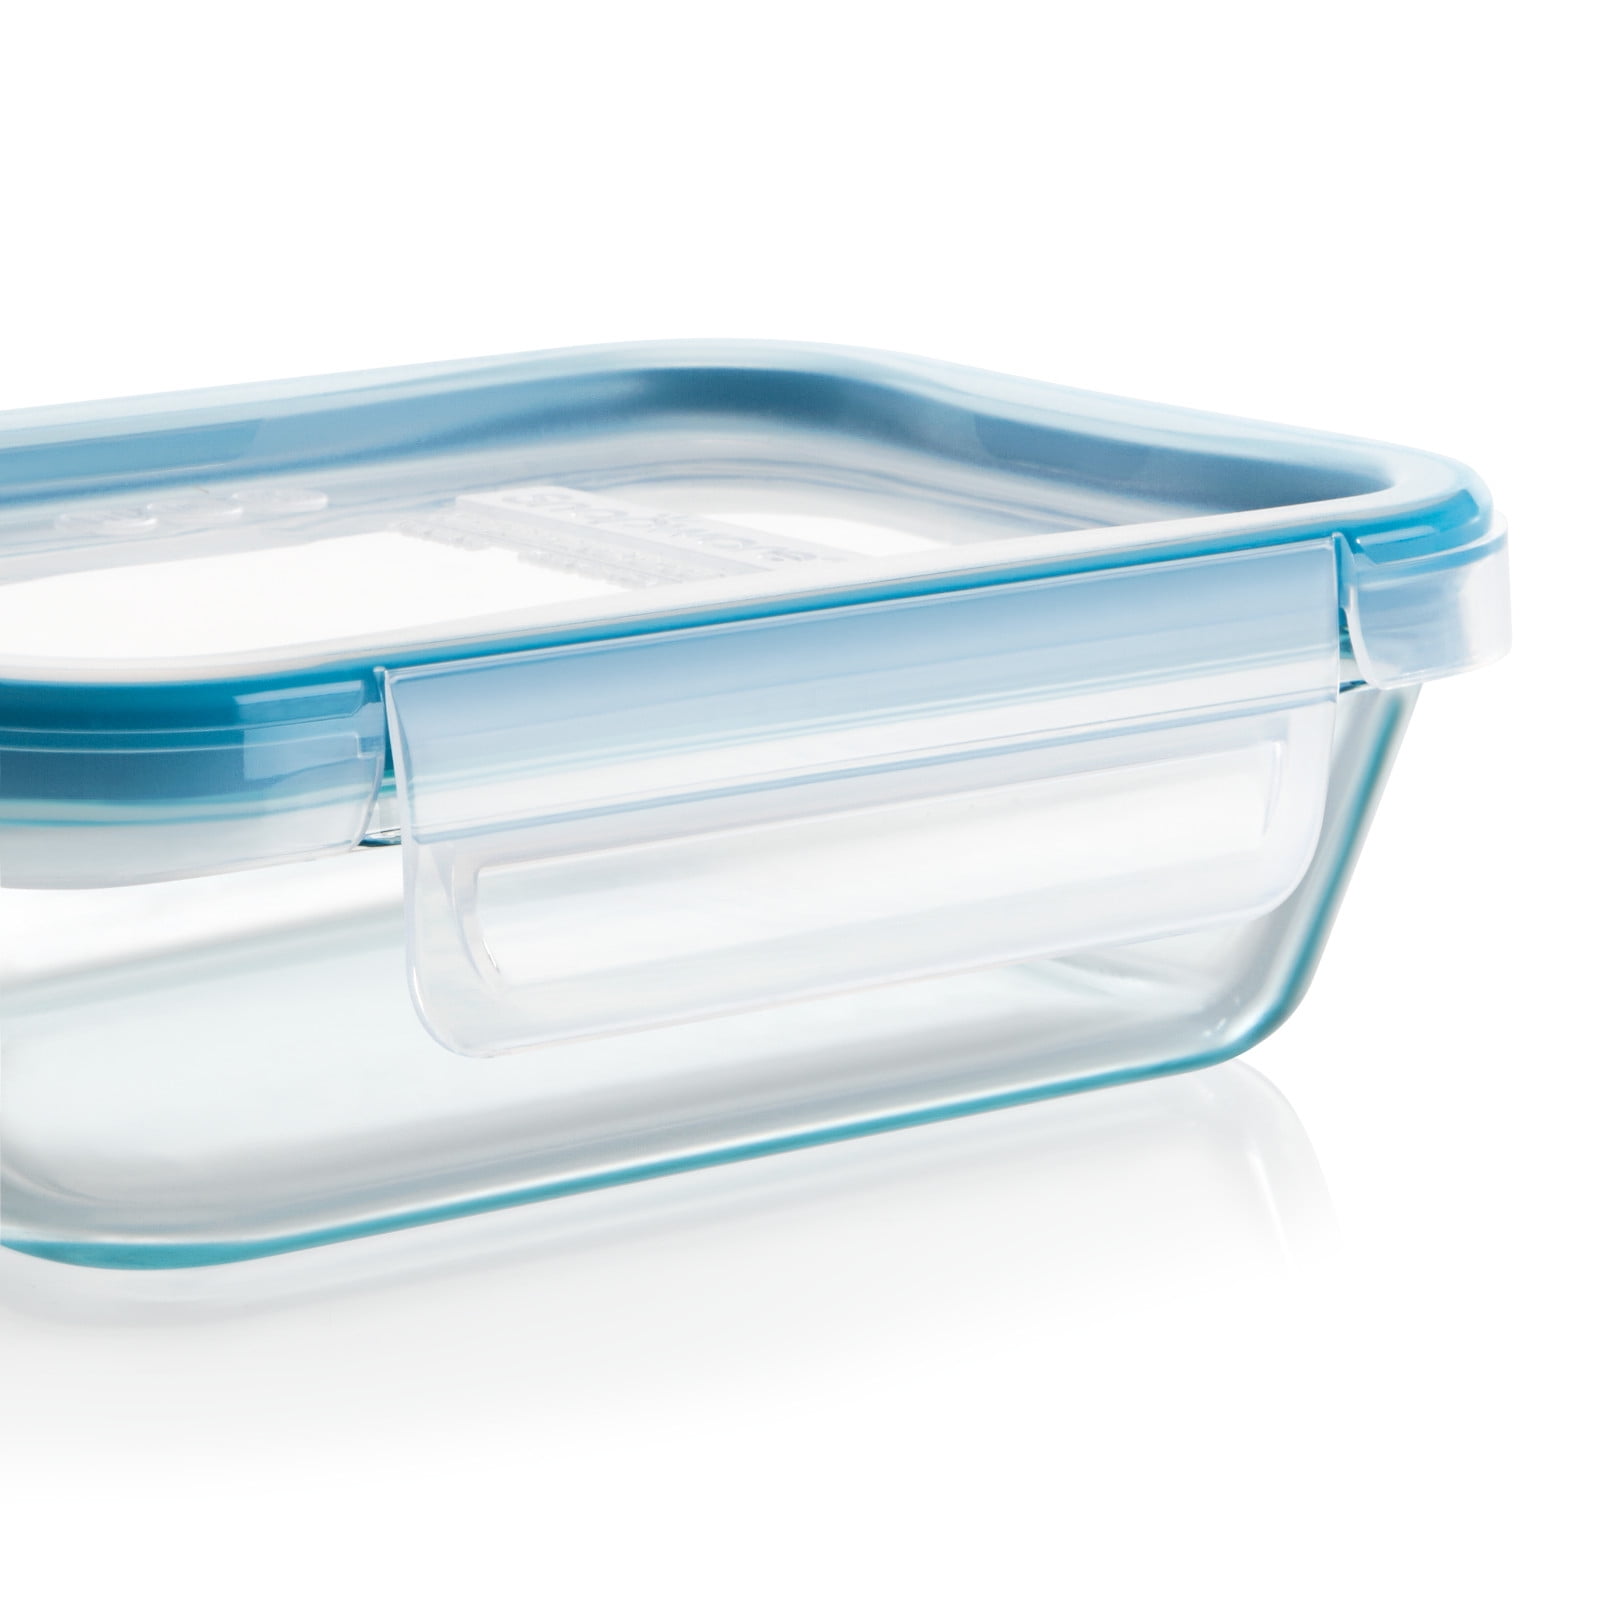 Snapware Total Solution 2-Cup Rectangle Pyrex Glass Storage Container with  Lid - Henery Hardware